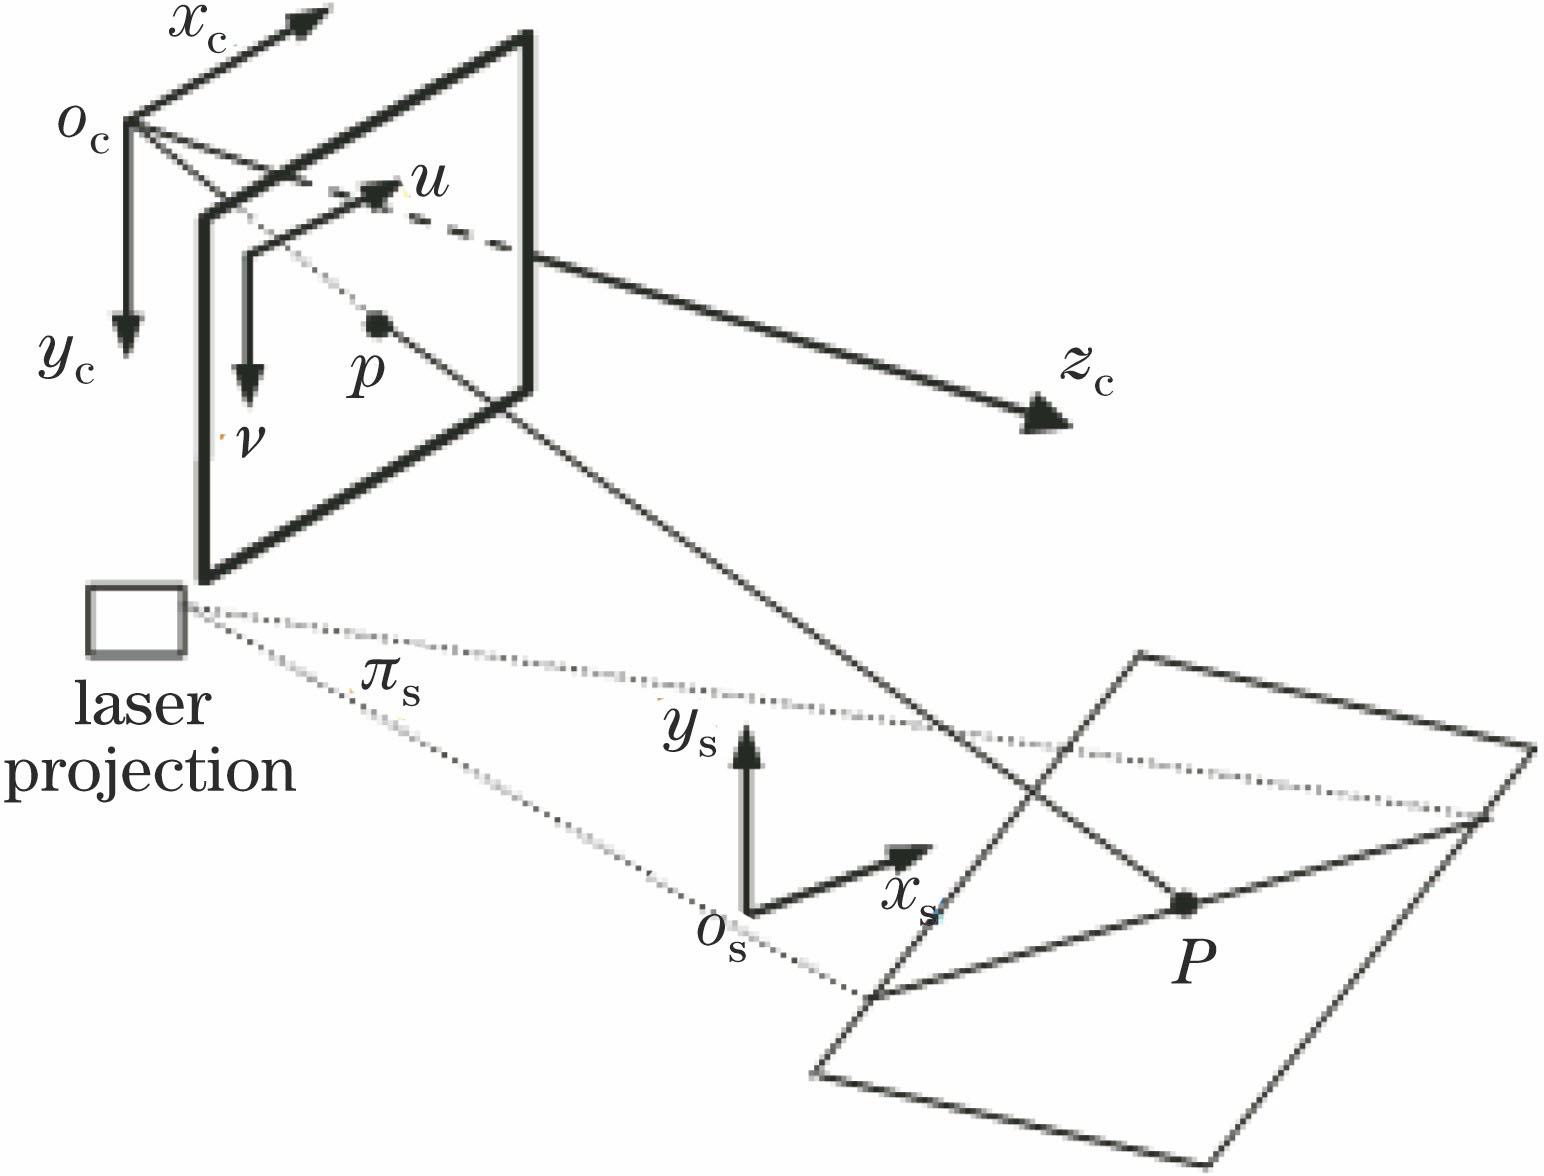 Intrinsic parameters model of line structured-light